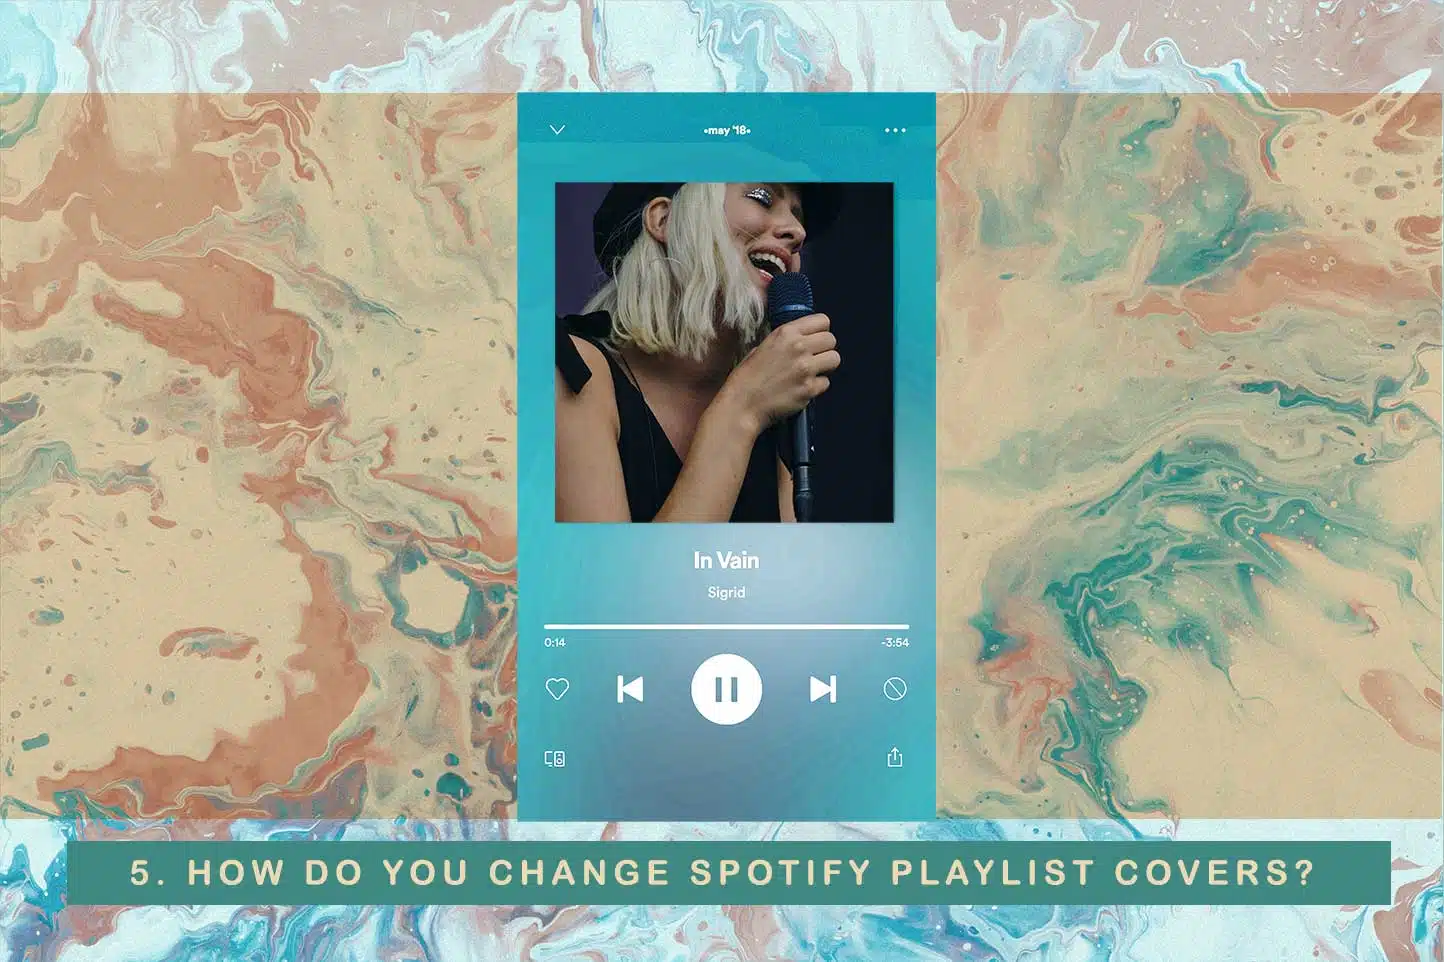 playlist-and-its-cover-with-title-How-do-you-change-spotify-playlist-covers